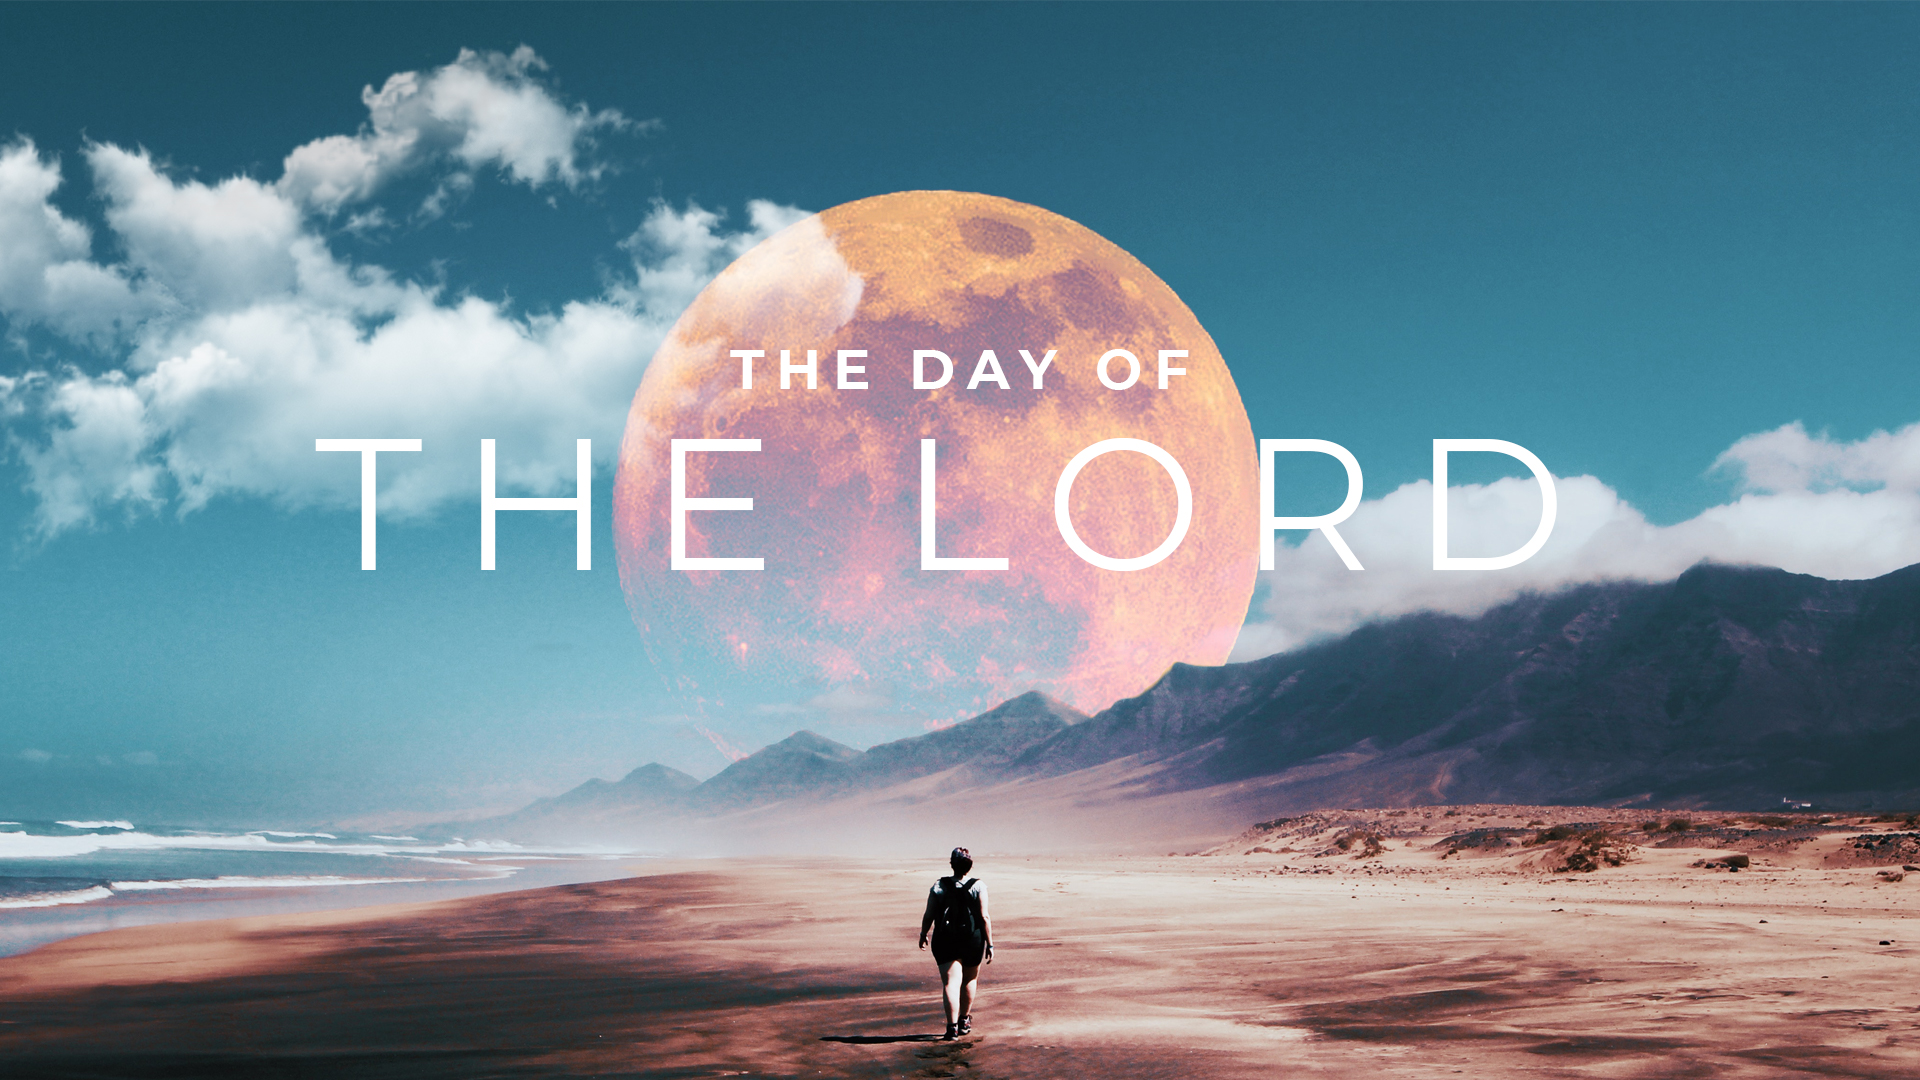 The Day of the Lord